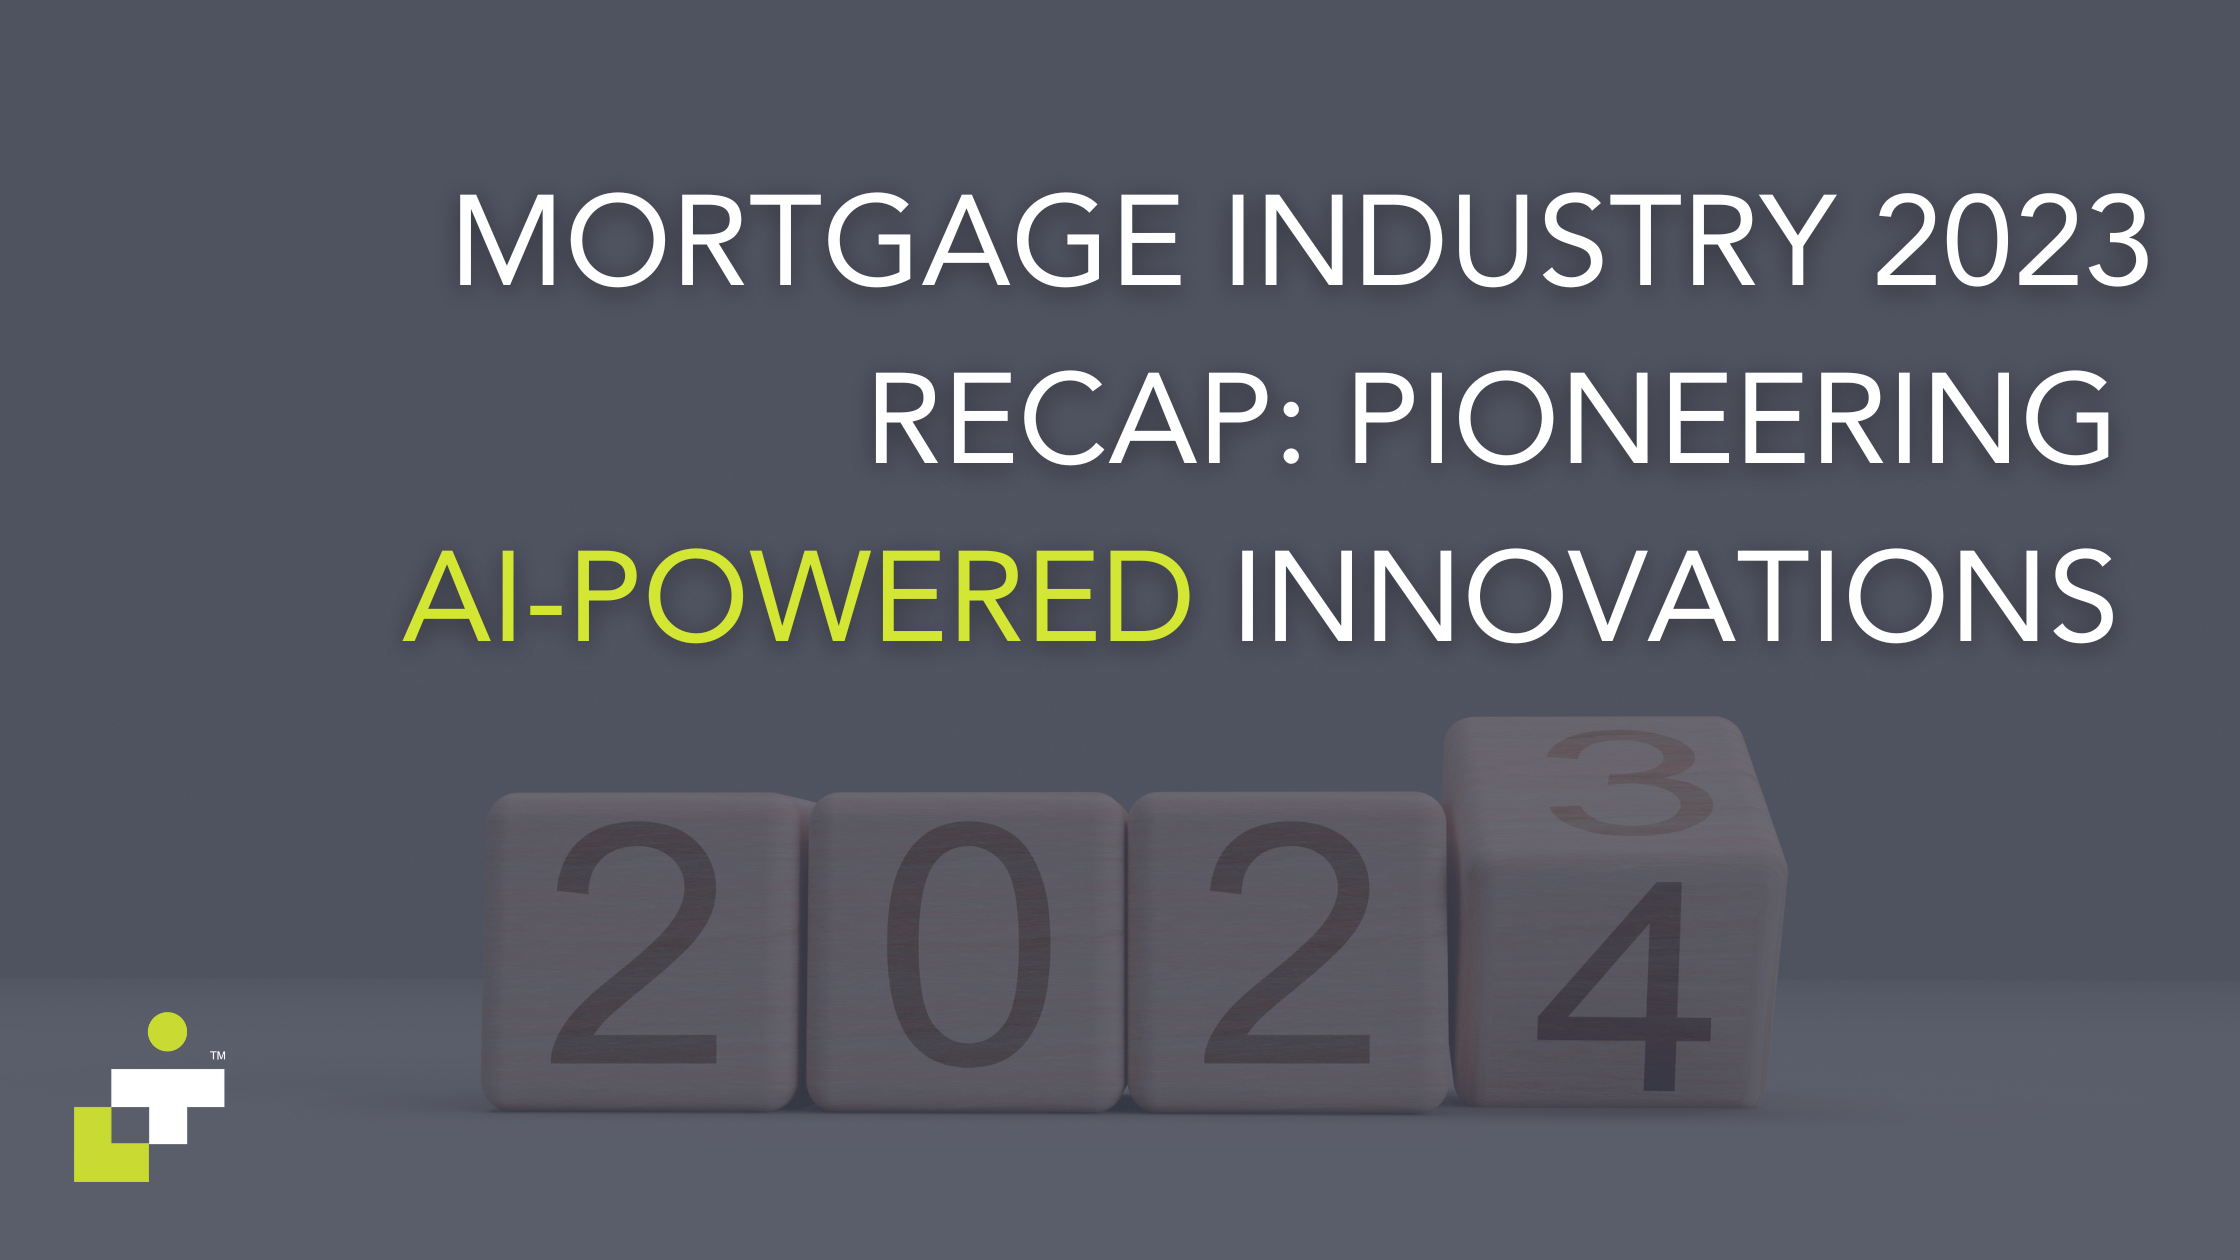 Mortgage Industry 2023 Recap: Pioneering AI-Powered Innovations